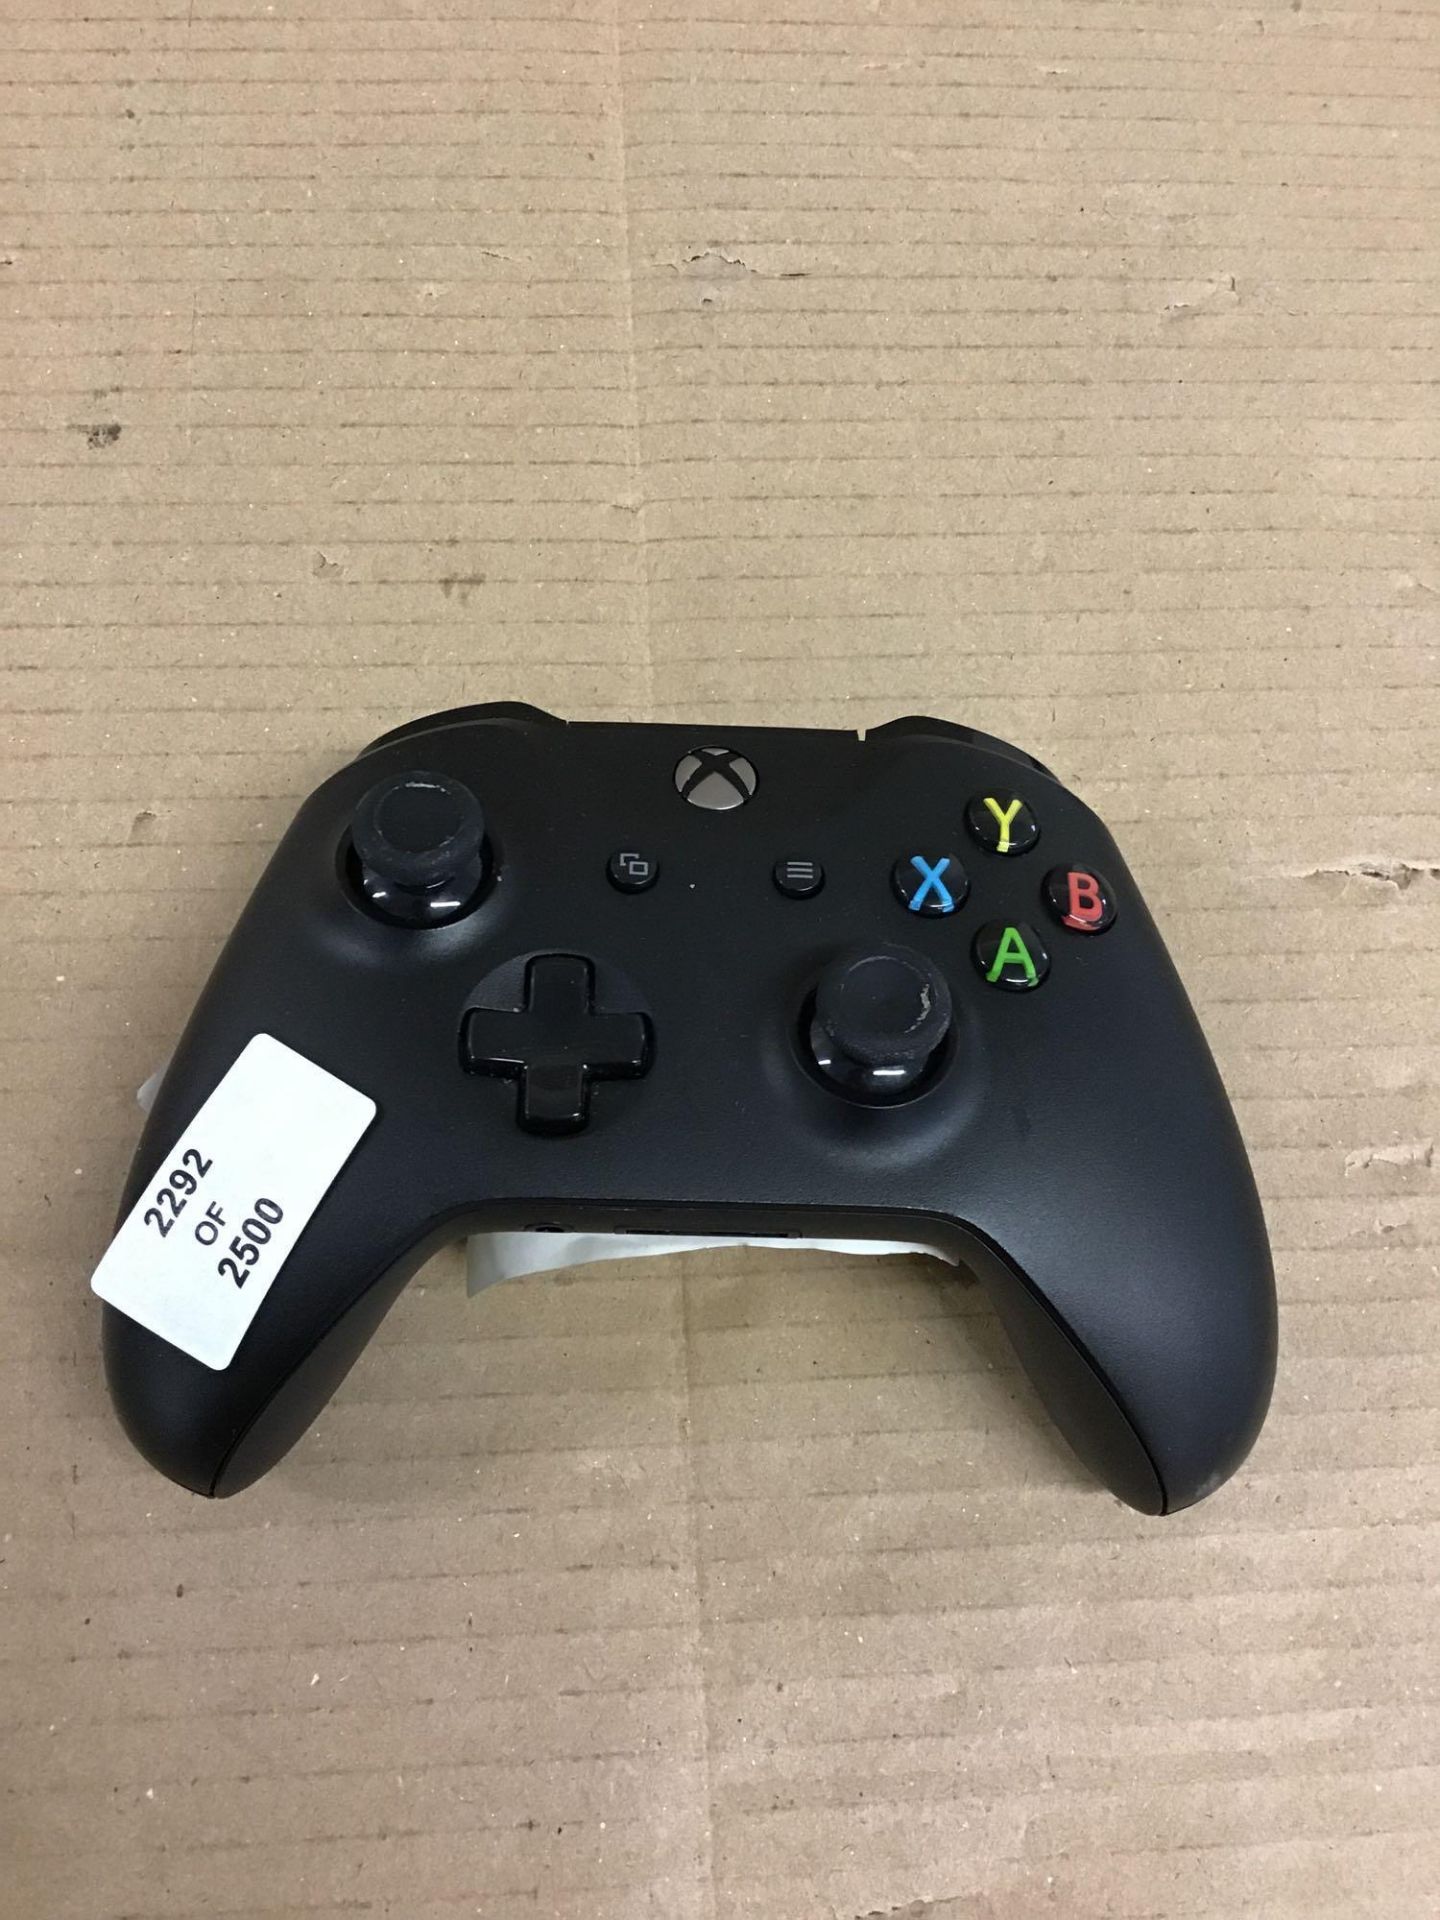 Official Xbox One Wireless Controller 3.5mm - Black (619/9582) - £39.99 RRP - Image 2 of 5